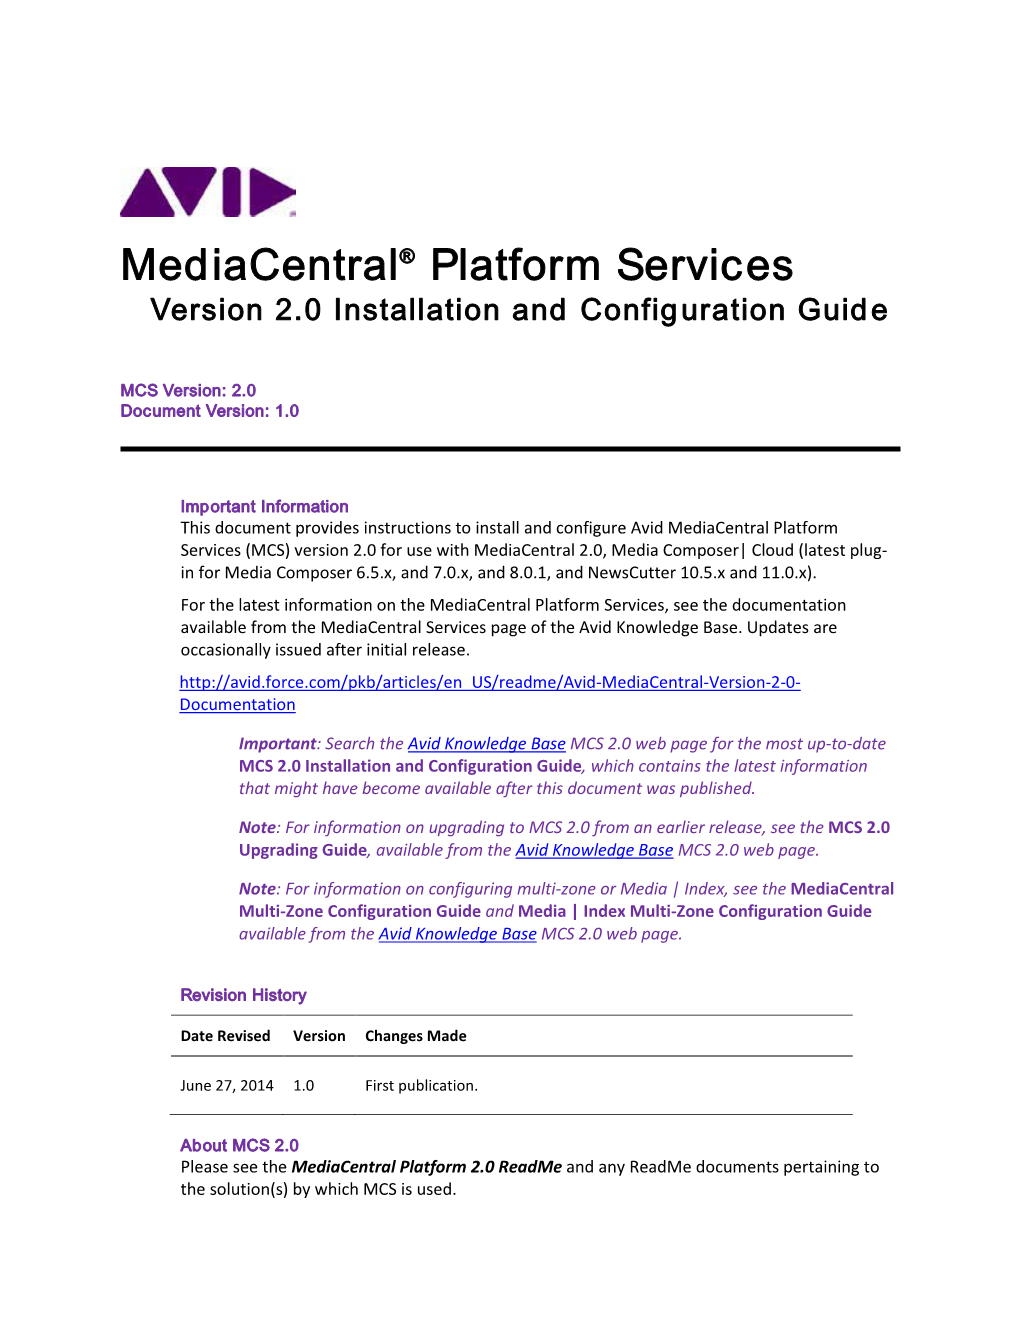 Mediacentral® Platform Services Version 2.0 Installation and Configuration Guide